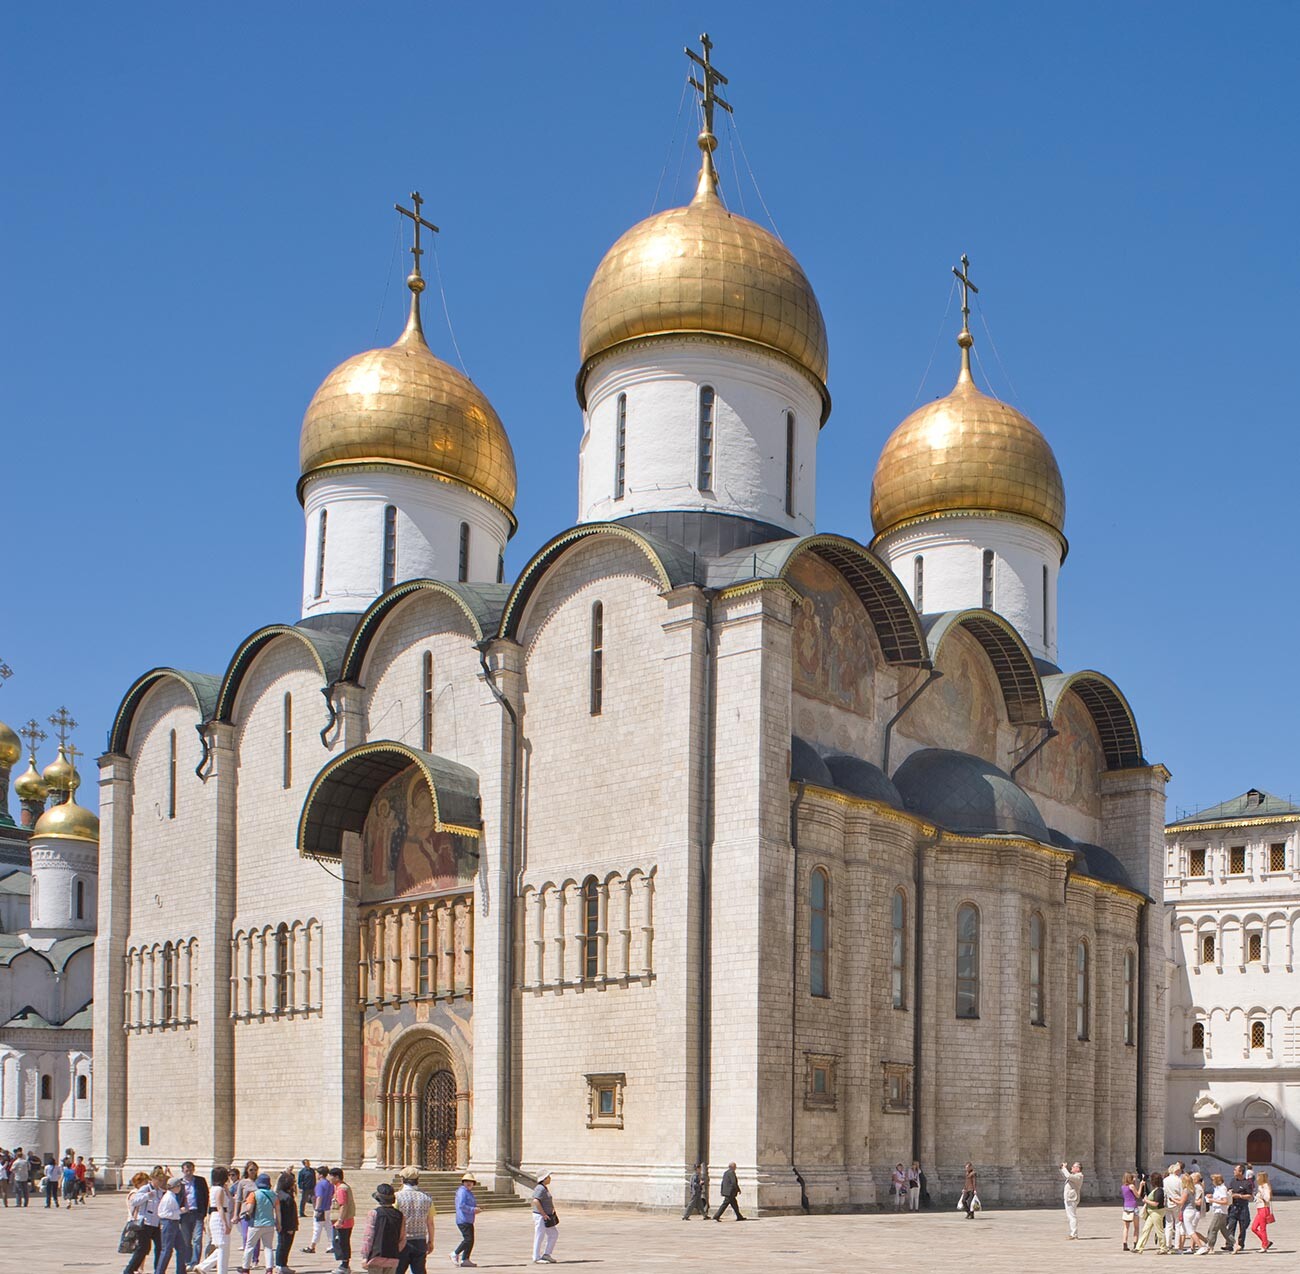 Dormition Cathedral, southeast view. June 17, 2012